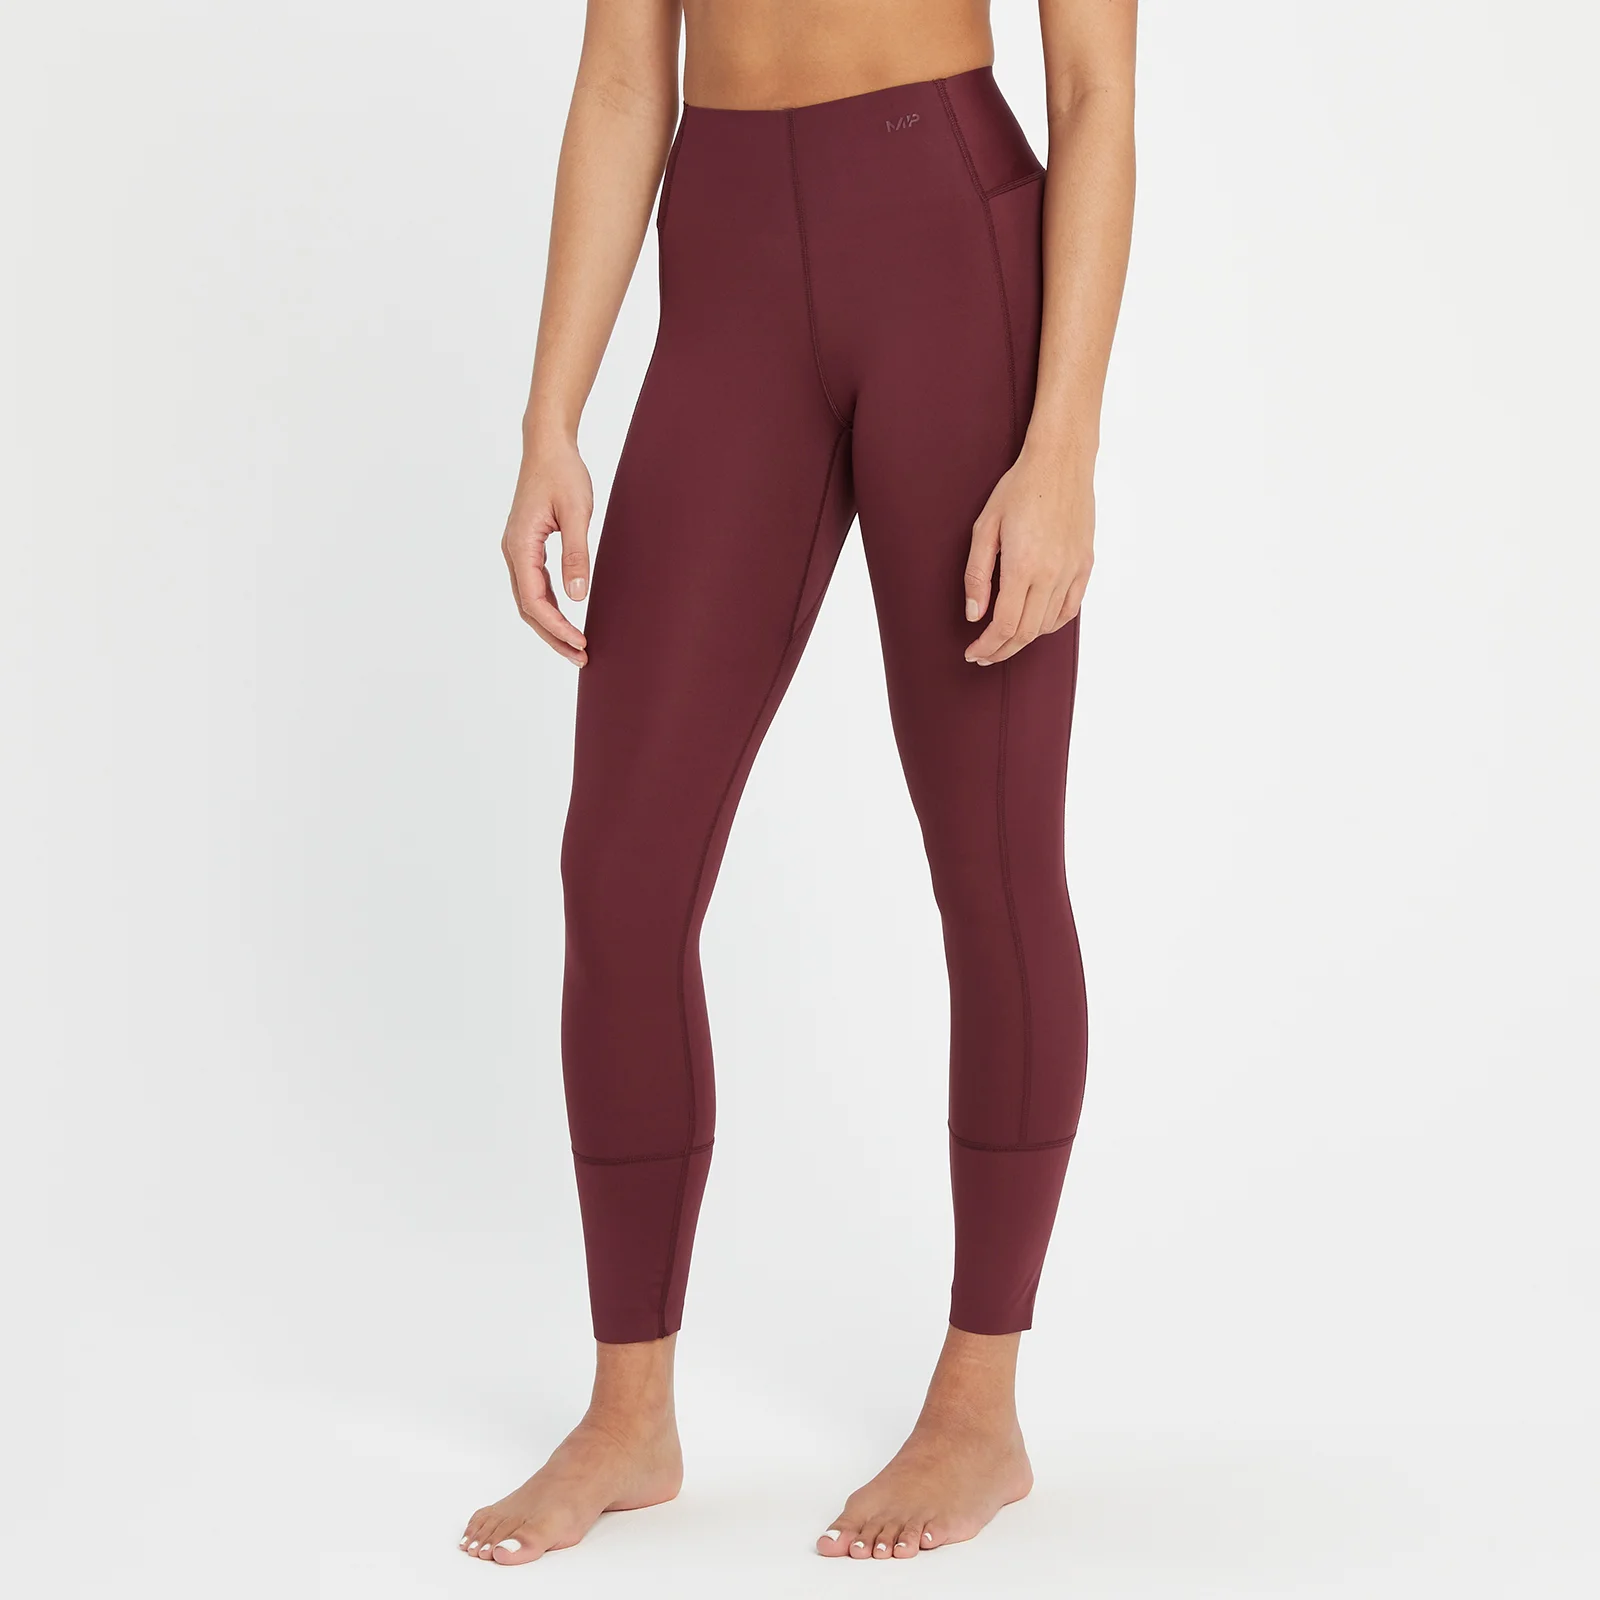 MP Women's Composure Repreve® Leggings - Washed Oxblood Image 1